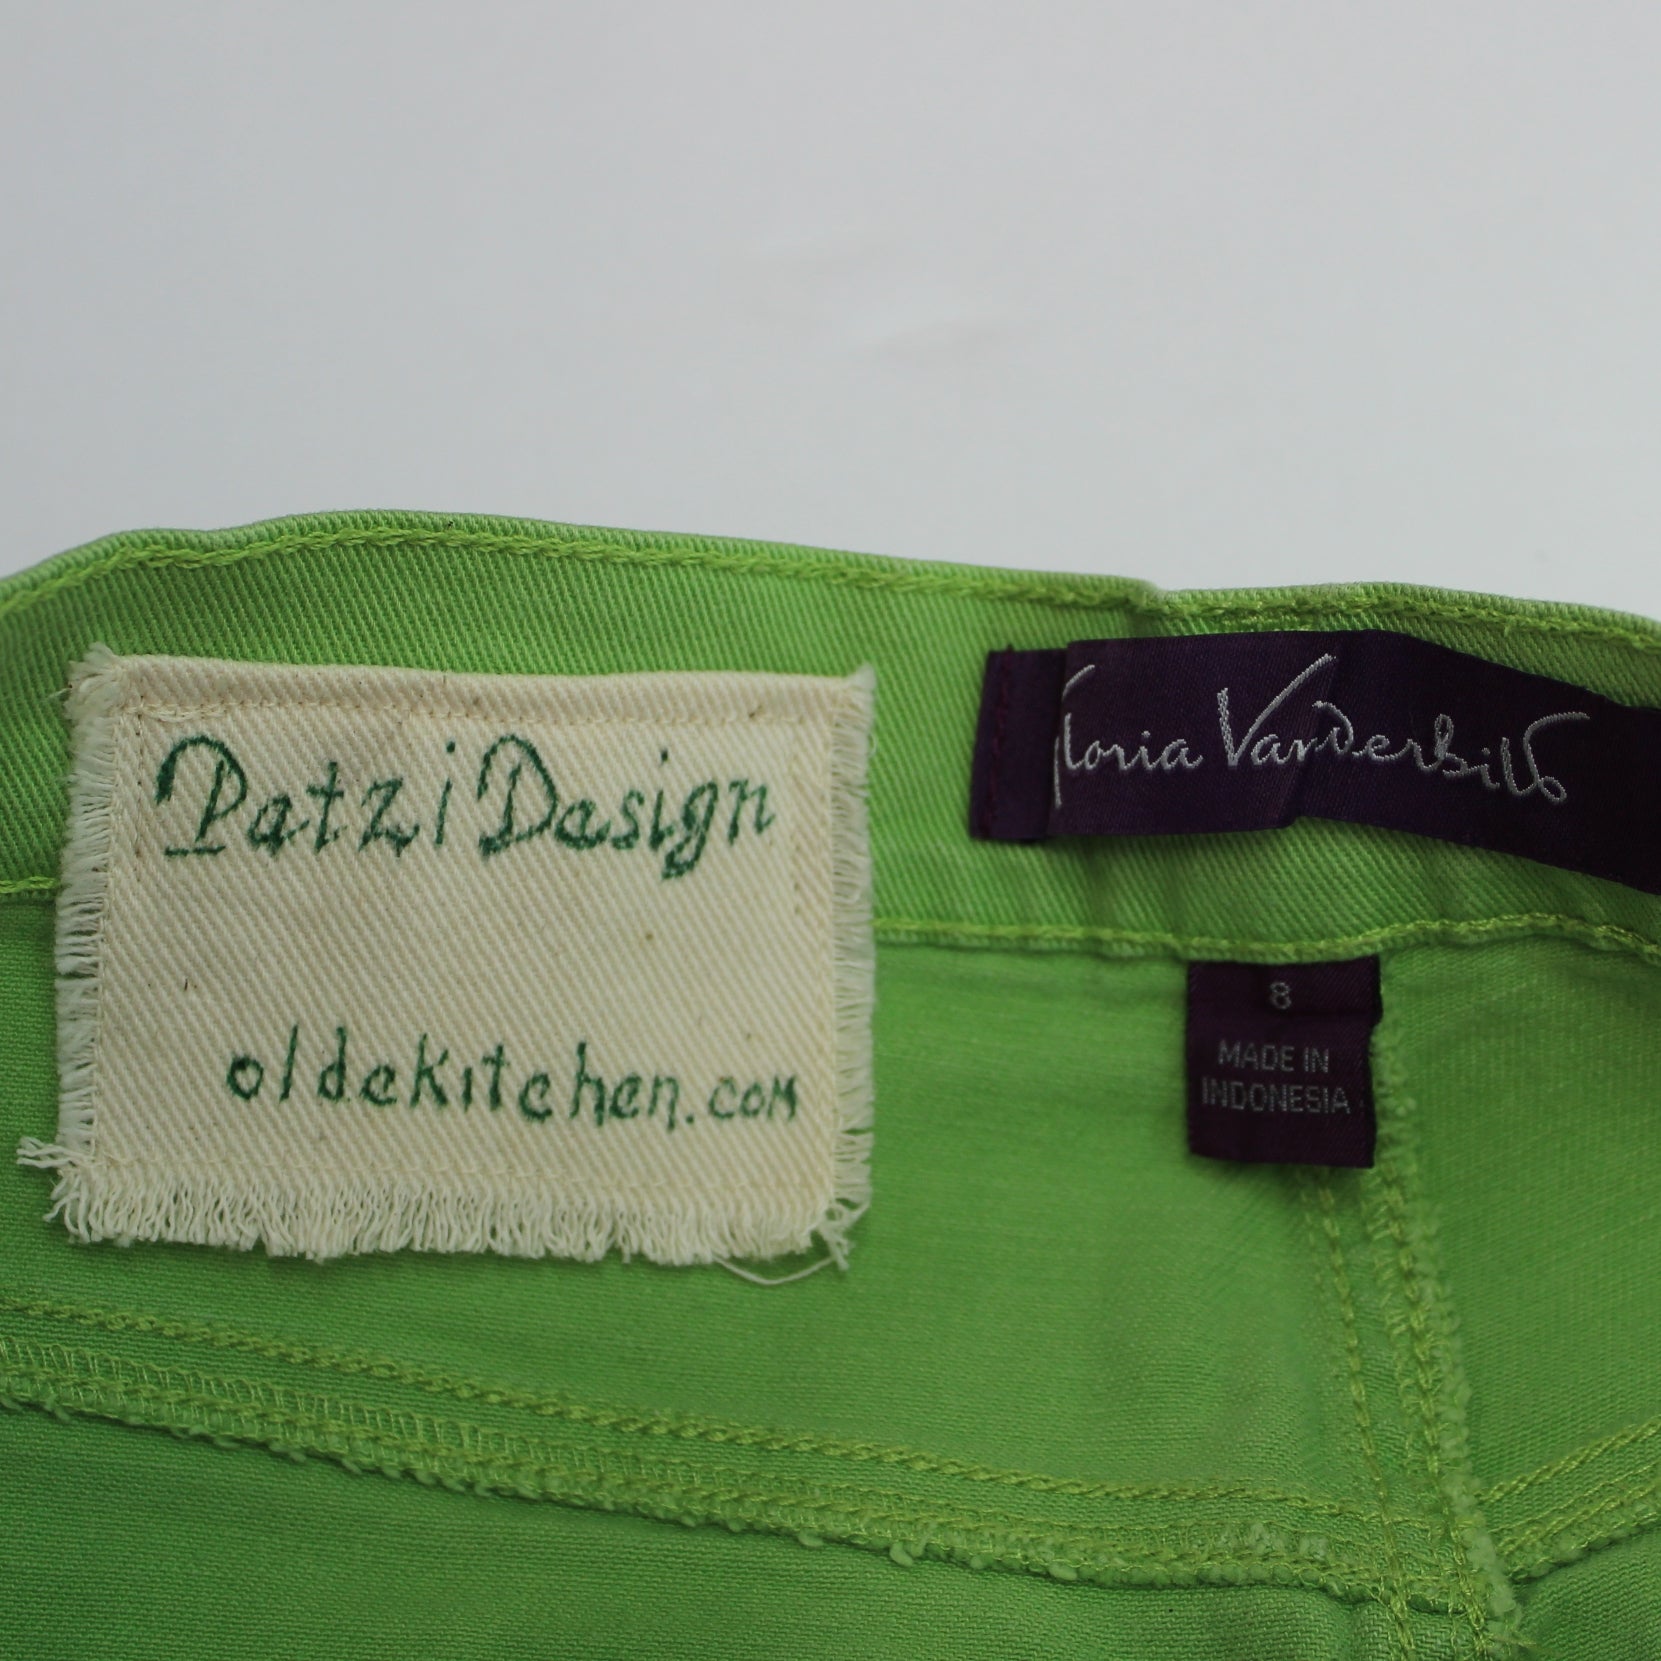 Gloria Vanderbilt Chartreuse Green Jeans Patzi Design Embroidery Flower Size 8 gloria and patzi tags